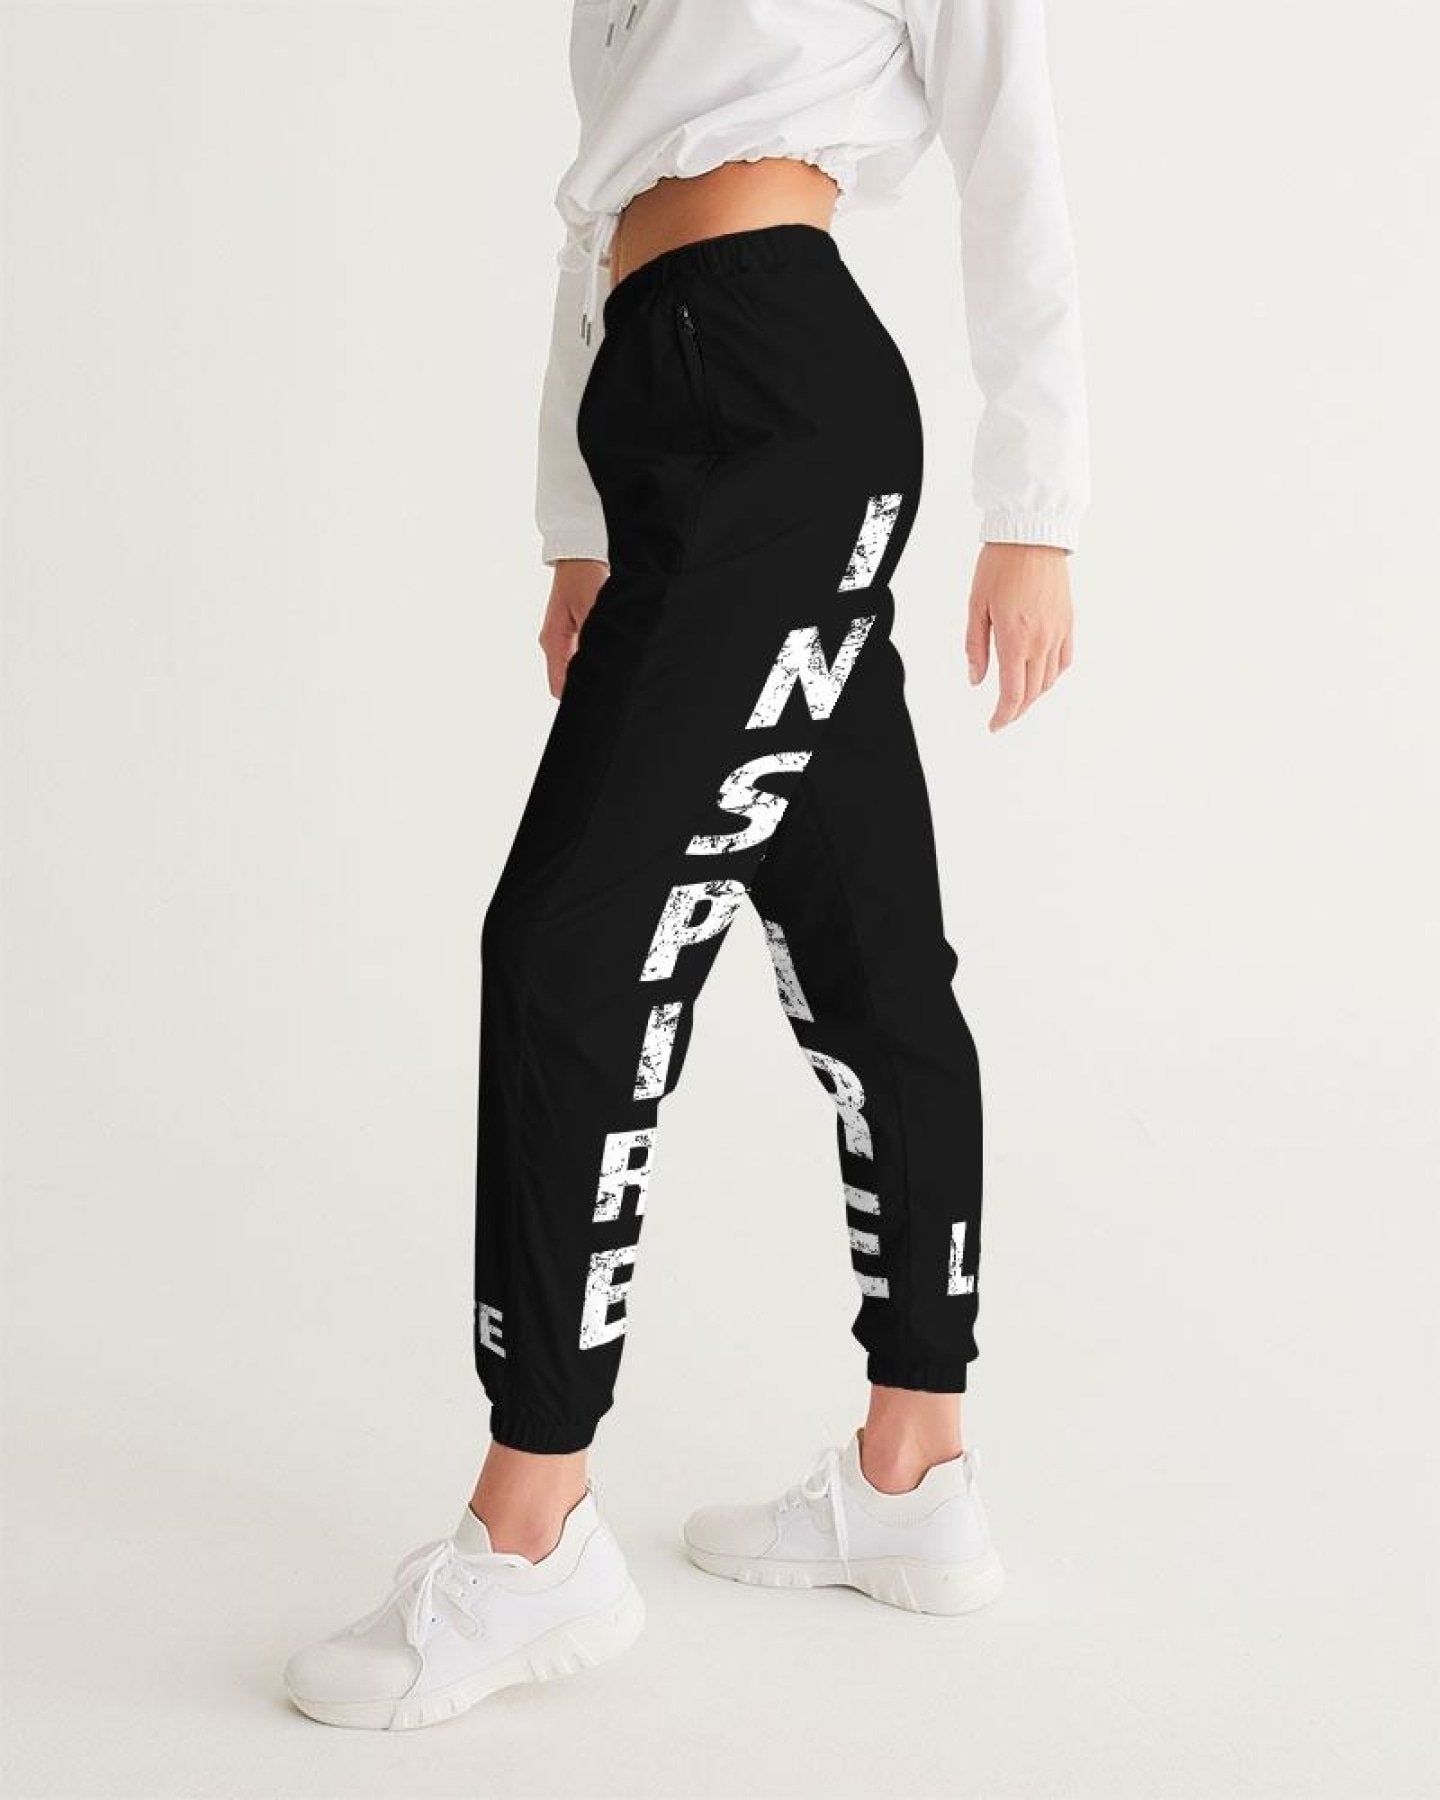 Elevate your active wardrobe with our stylish Liz Track Pants for women. Discover comfort and performance in our women's track pants designed to keep you moving.